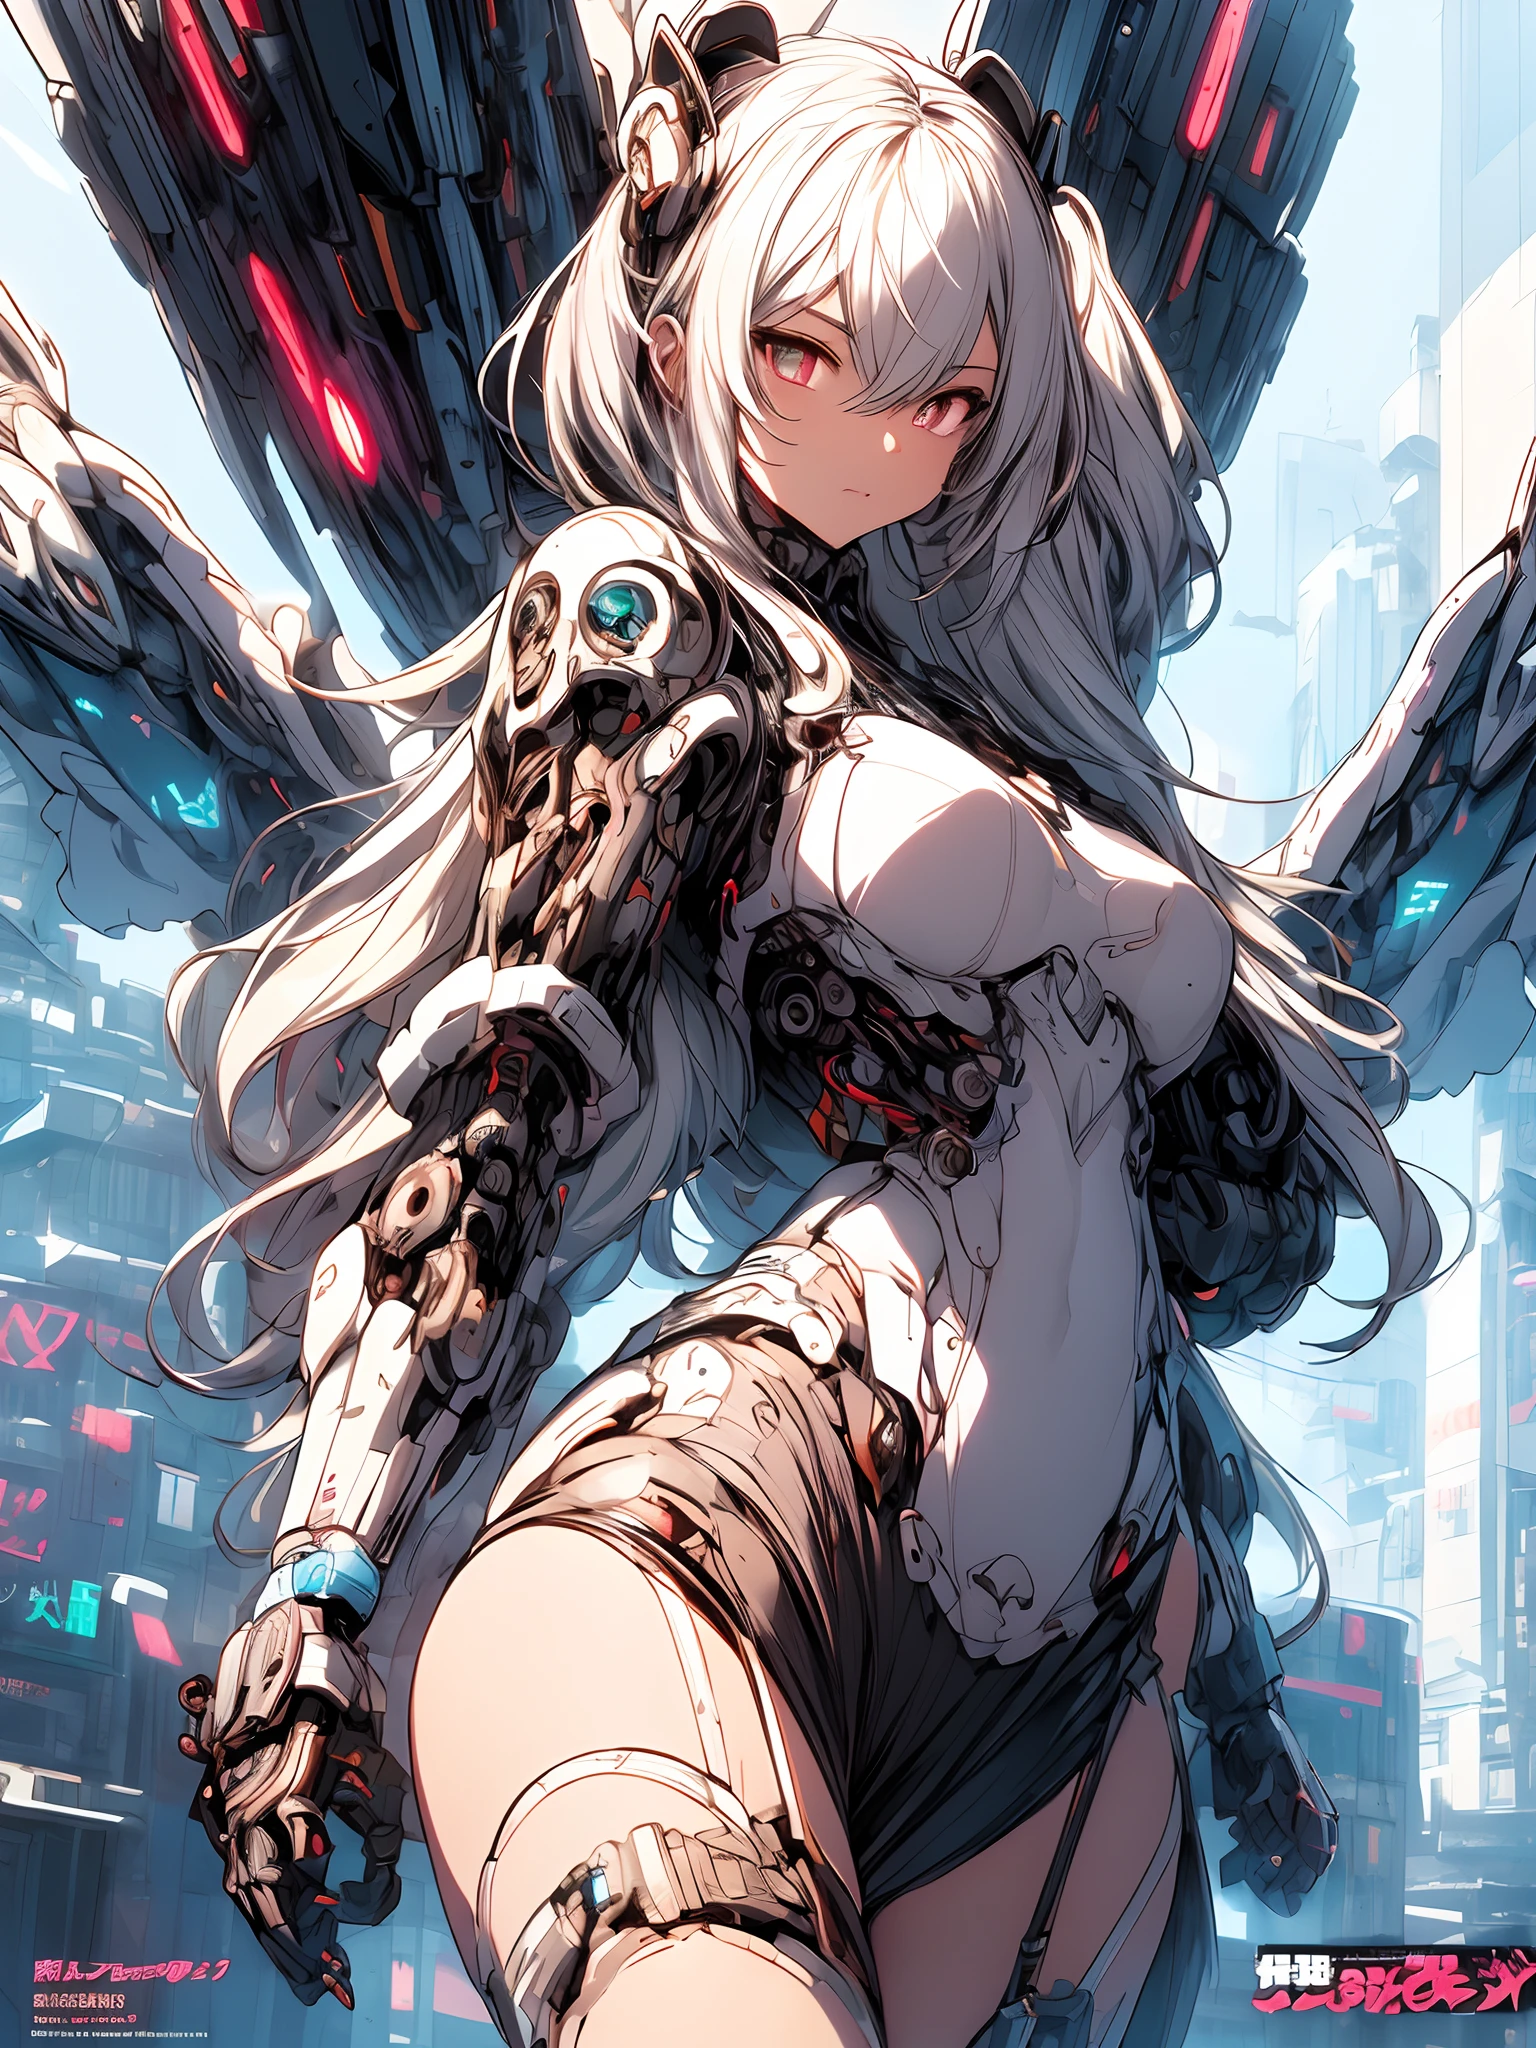 anime character with wings and glowing eyes in a city, cyberpunk anime girl mech, digital cyberpunk anime art, anime cyberpunk art, best anime 4k konachan wallpaper, anime robotic mixed with organic, digital cyberpunk - anime art, cyberpunk anime art, anime mecha aesthetic, detailed digital anime art, anime art wallpaper 4k, anime art wallpaper 4 k, cyberpunk anime girl(1girl:1.4), bodysuit, cyborg girl, hyper gigantic mechanical hands,dynamic pose, looking back at the camera nice hands, perfect hands, incredibly cinematic, best quality, best resolutionhighly detailed background, absurdres, highres, ultra detailed, (cute illustration:1.5), (cute,kawaii,sweet:1.2),
(1girl:1.4), bodysuit, cyborg girl,
hyper gigantic mechanical hands,dynamic pose, nice hands, perfect hands, incredibly cinematic, best quality, best resolution